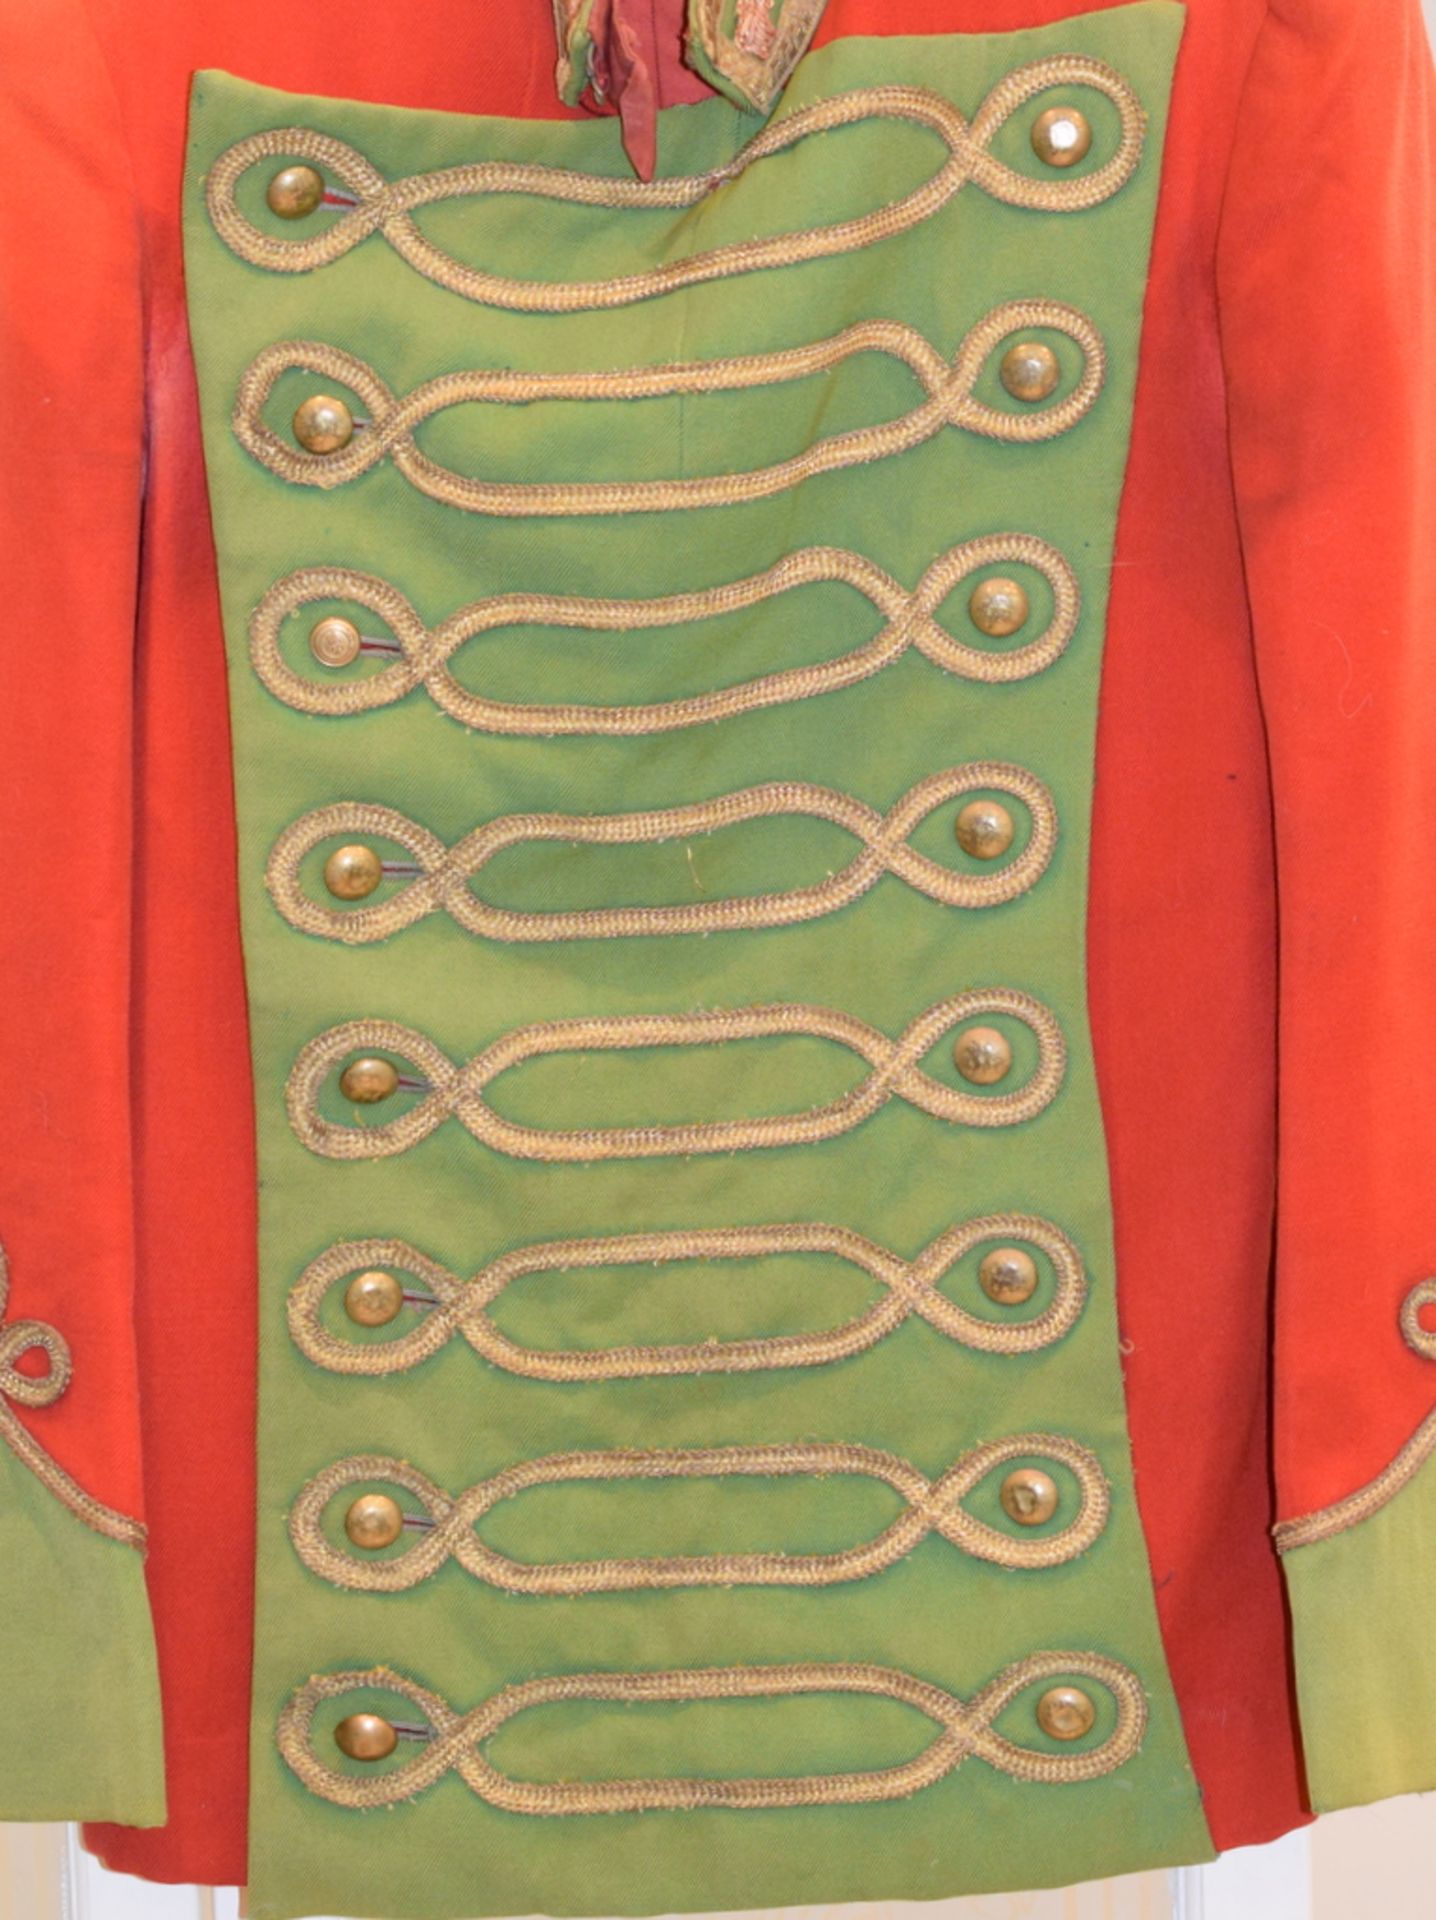 Antique Military Jacket In Red With Green Panelling c1840/60s - Image 2 of 7